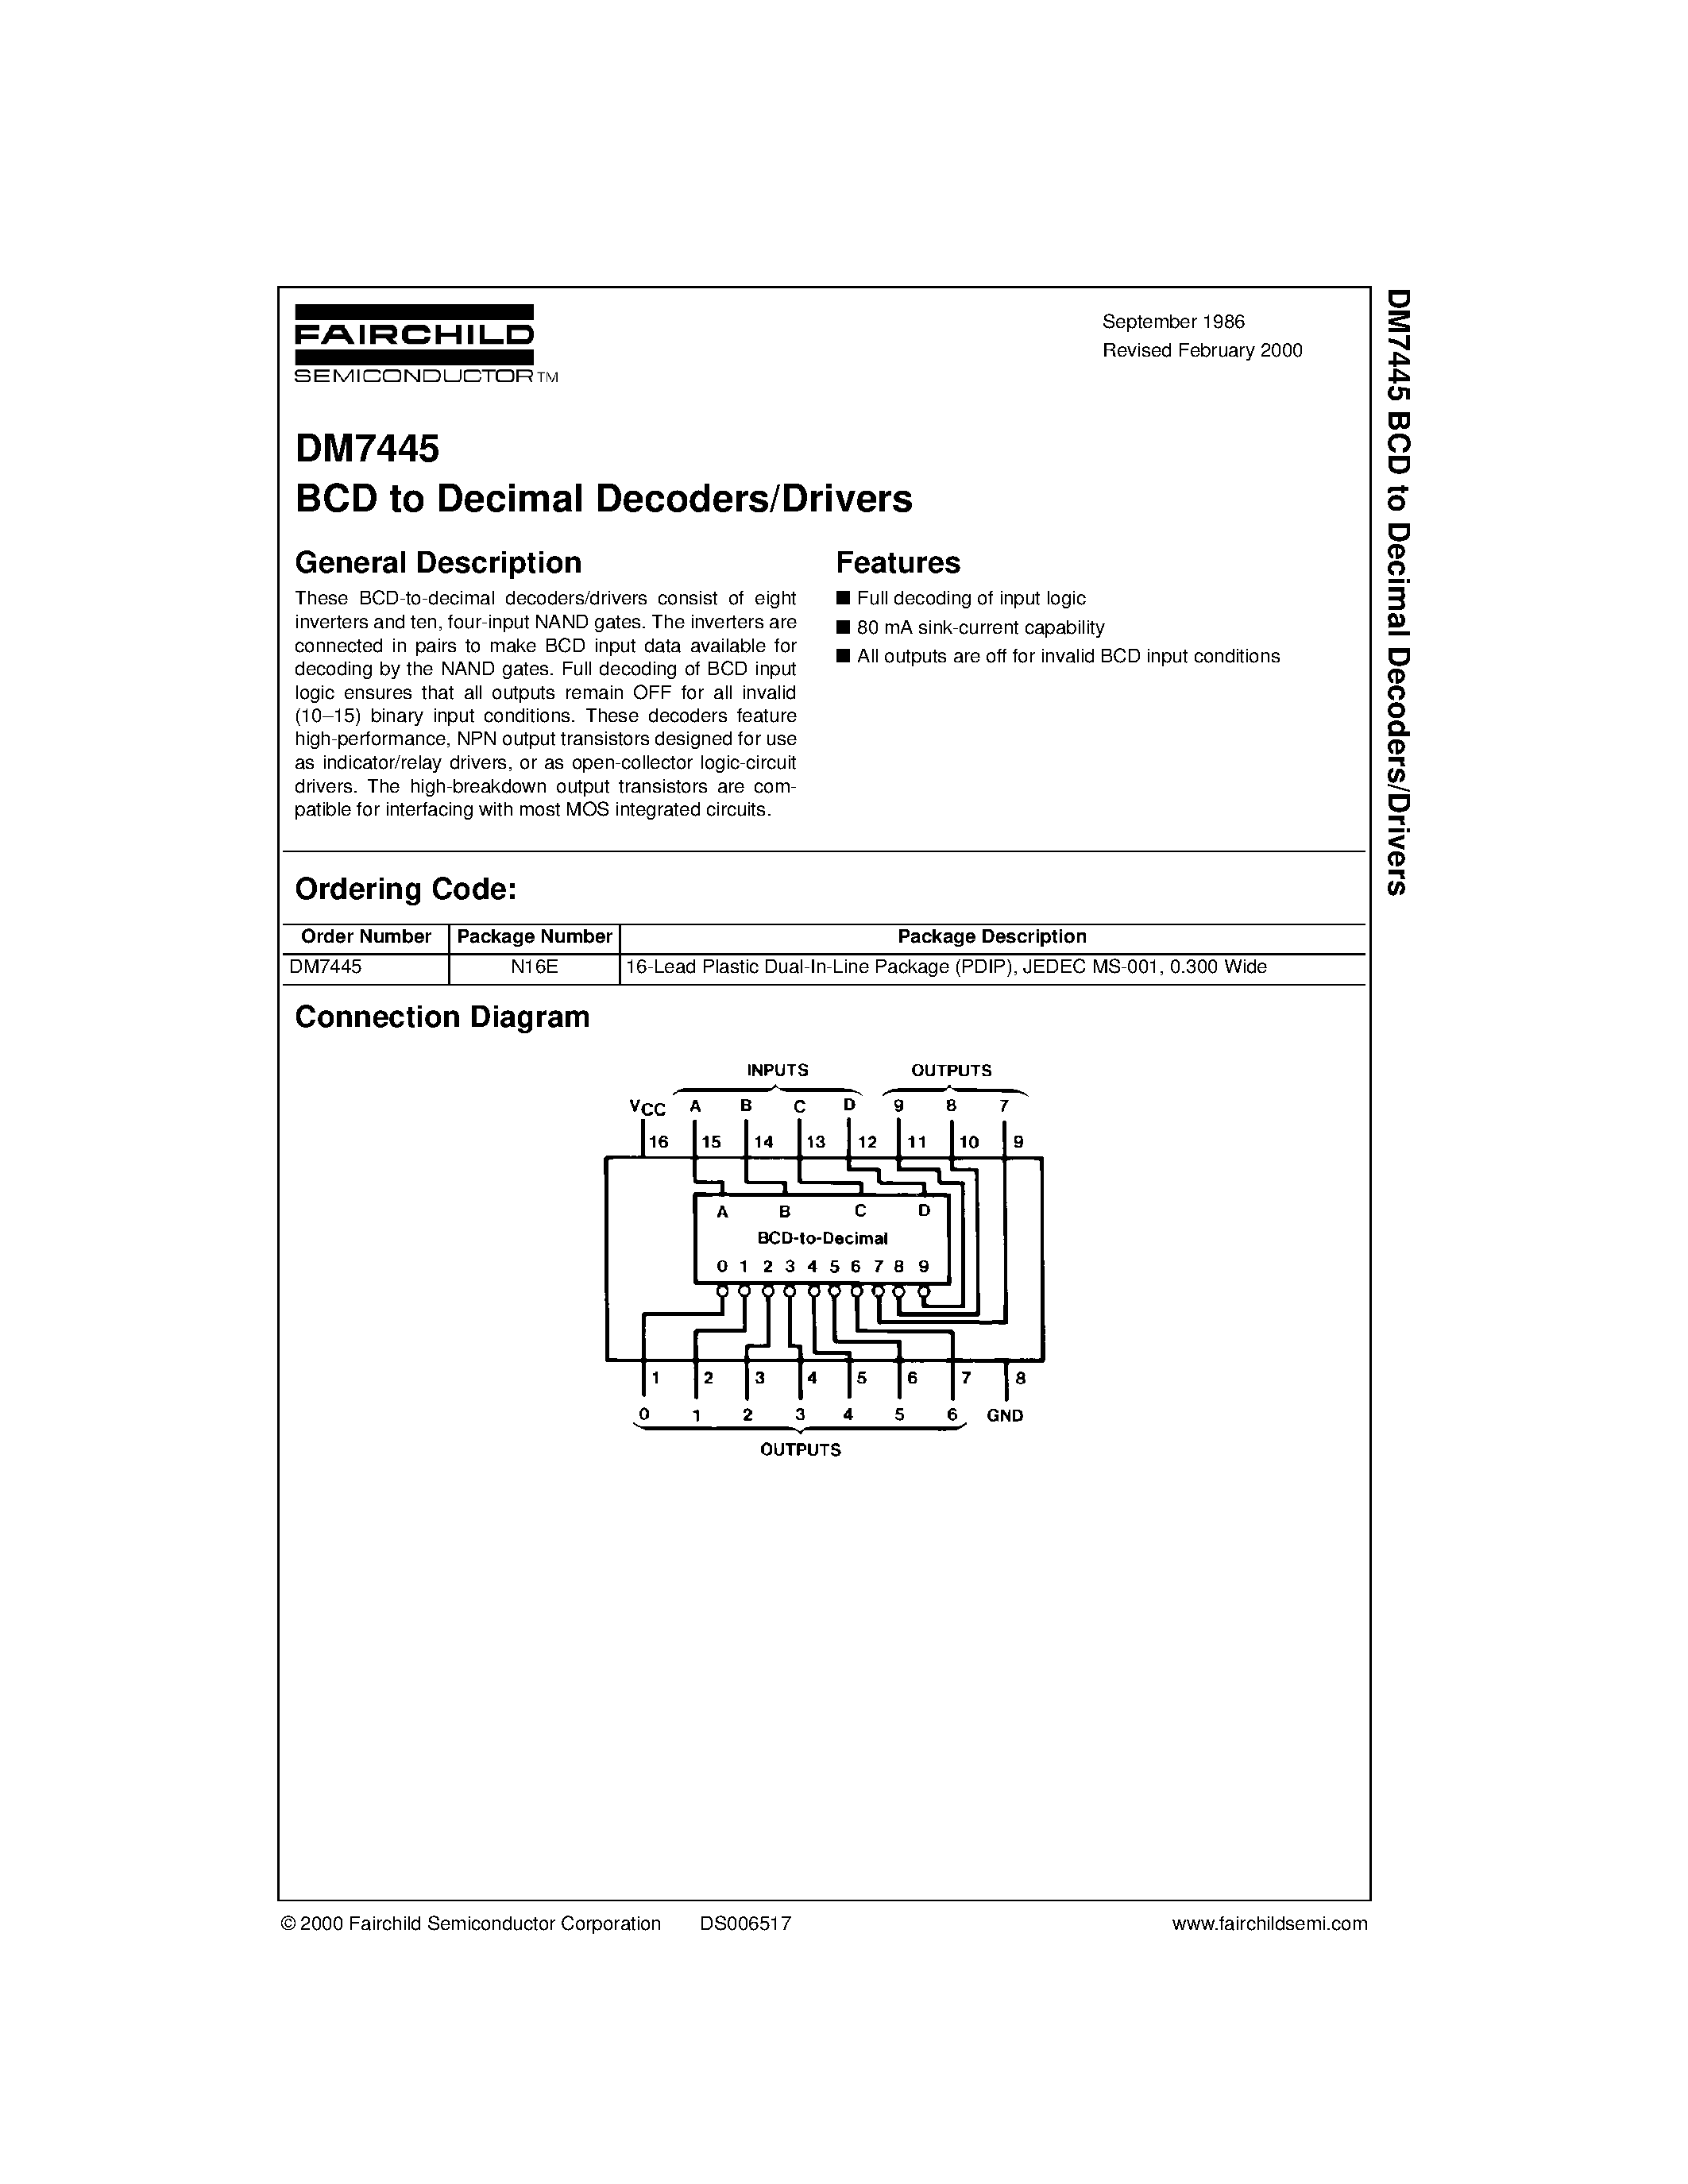 Datasheet 7445 - BCD to Decimal Decoders/Drivers page 1